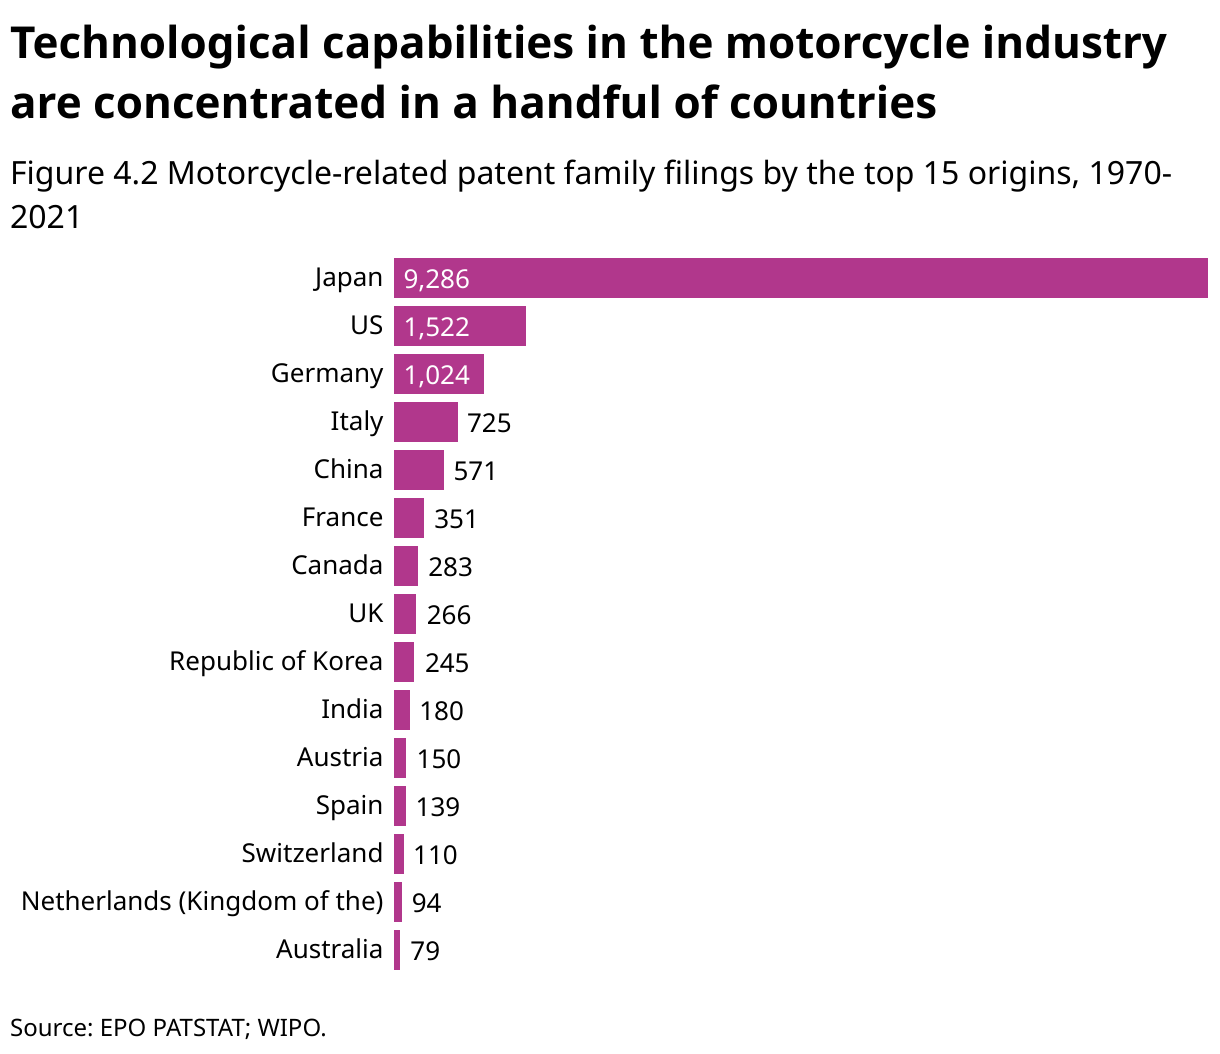 This bar chart displays motorcycle-related patent family filings from 1970 to 2021 by the top 15 countries. Japan leads significantly with 9,286 filings. The United States follows with 1,522 filings, and Germany is next at 1,024 filings. The other countries included in the top 15 are Italy with 725 filings, China with 571, France with 351, Canada with 283, the United Kingdom with 266, the Republic of Korea with 245, India with 180, Austria with 150, Spain with 139, Switzerland with 110, the Netherlands with 94, and Australia with 79 filings. Each bar represents the total number of filings from a specific country, with the bars arranged in descending order of the number of filings.